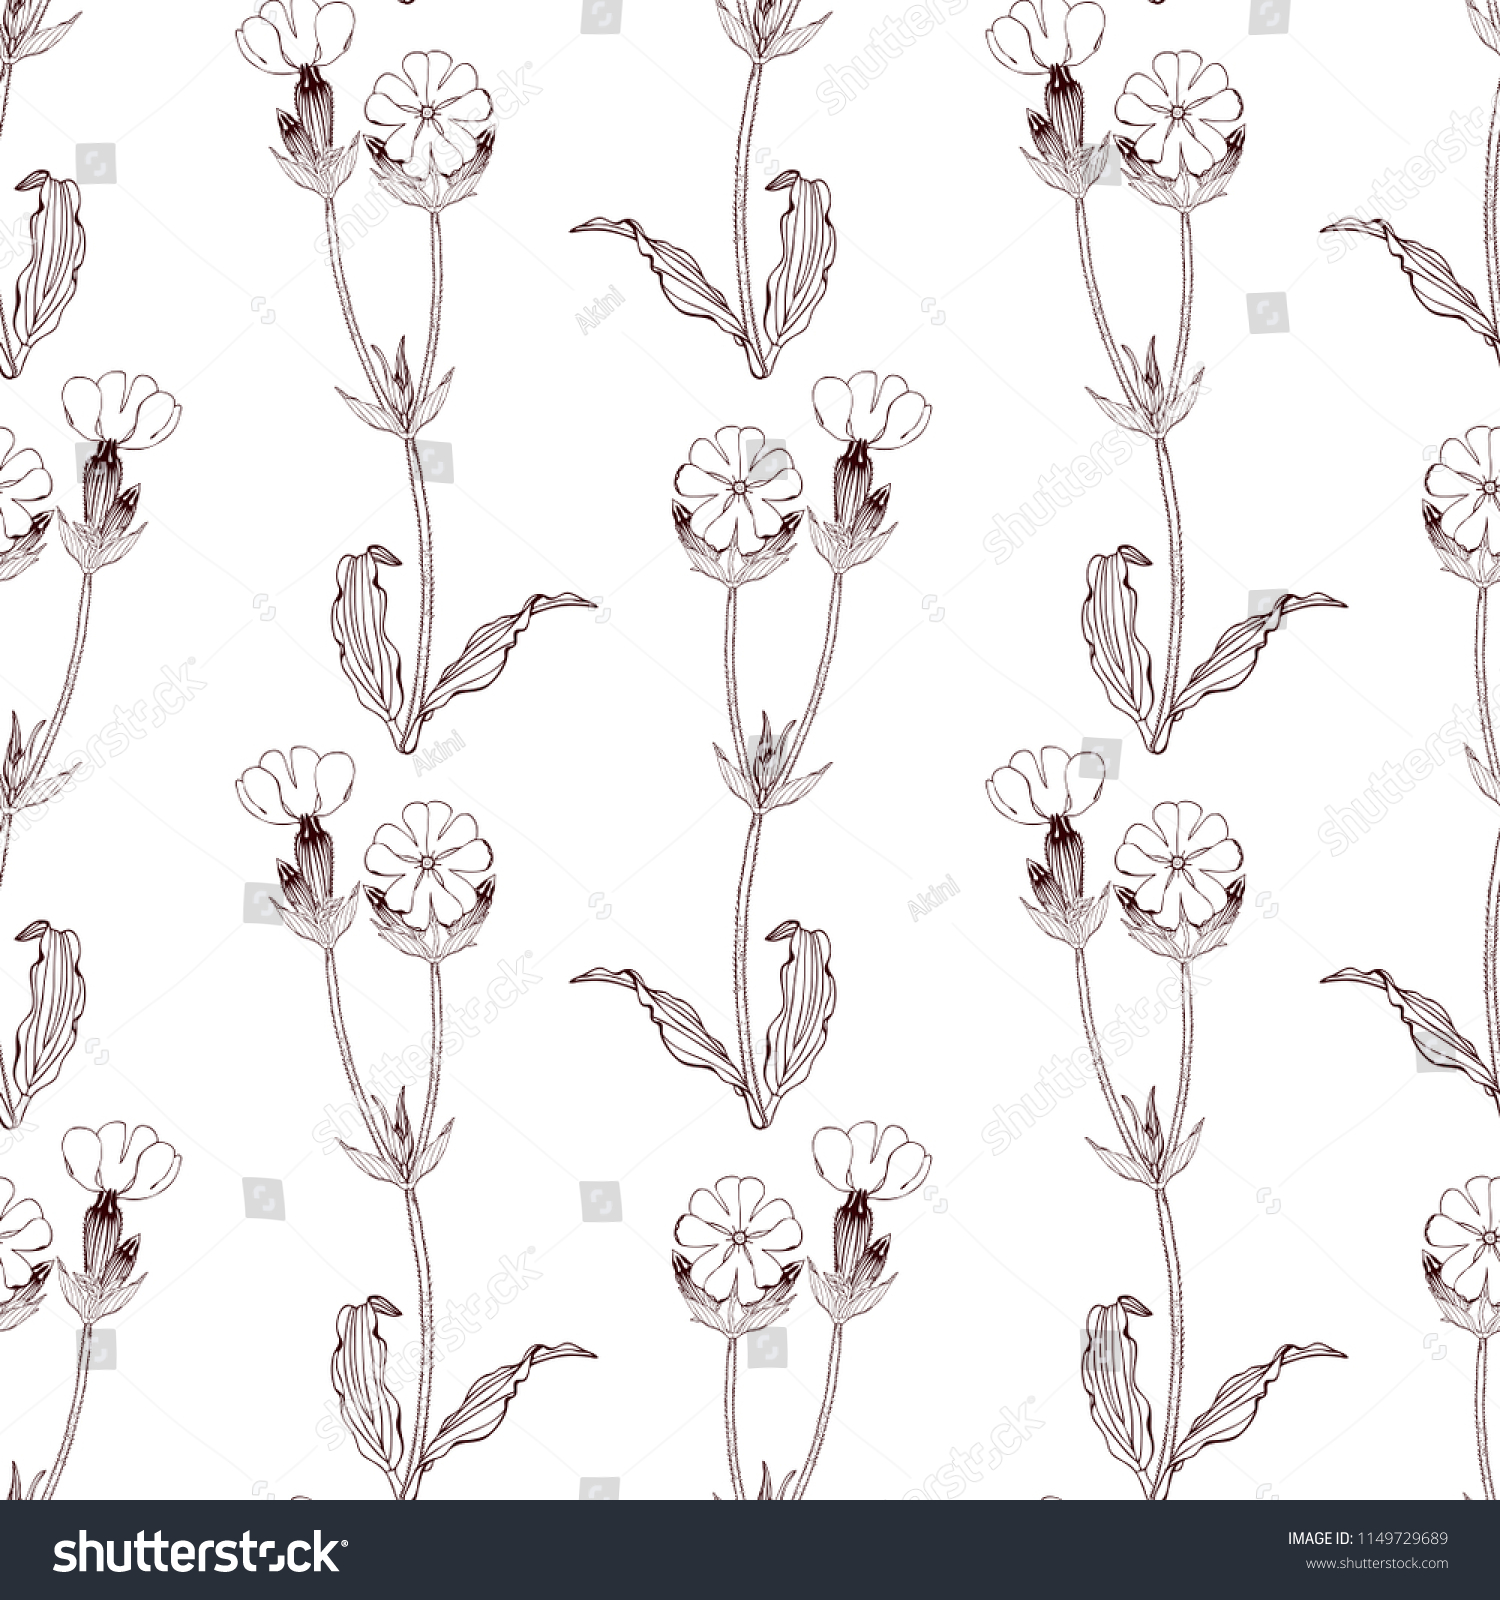 Black and white Seamless pattern with flowers on white background. For Packaging paper, greeting cards design, textile, fabric #1149729689